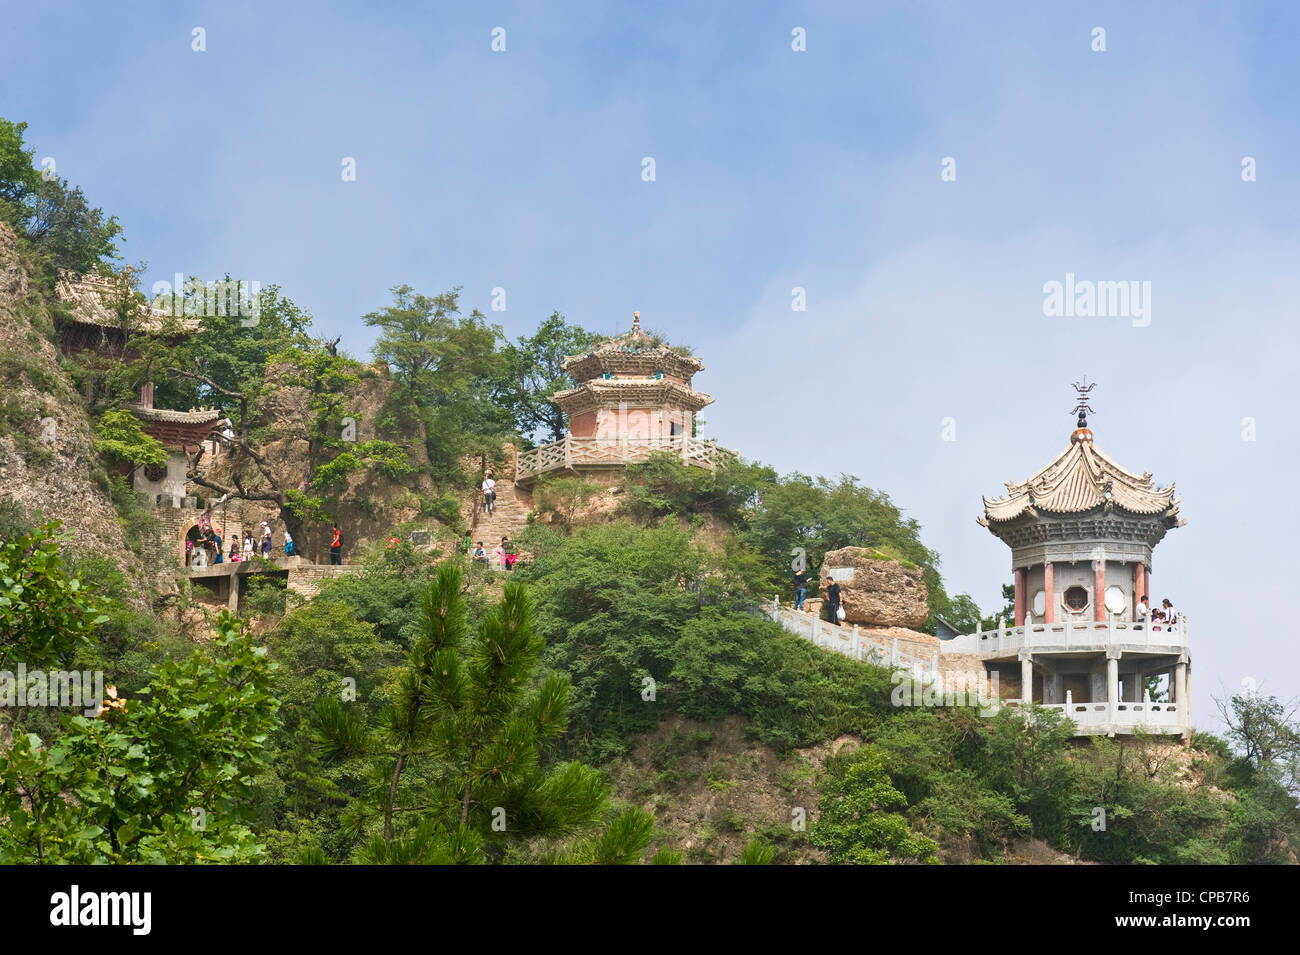 The Three Religions Temple on Mount Kongtong near Pingliang city in China. Stock Photo